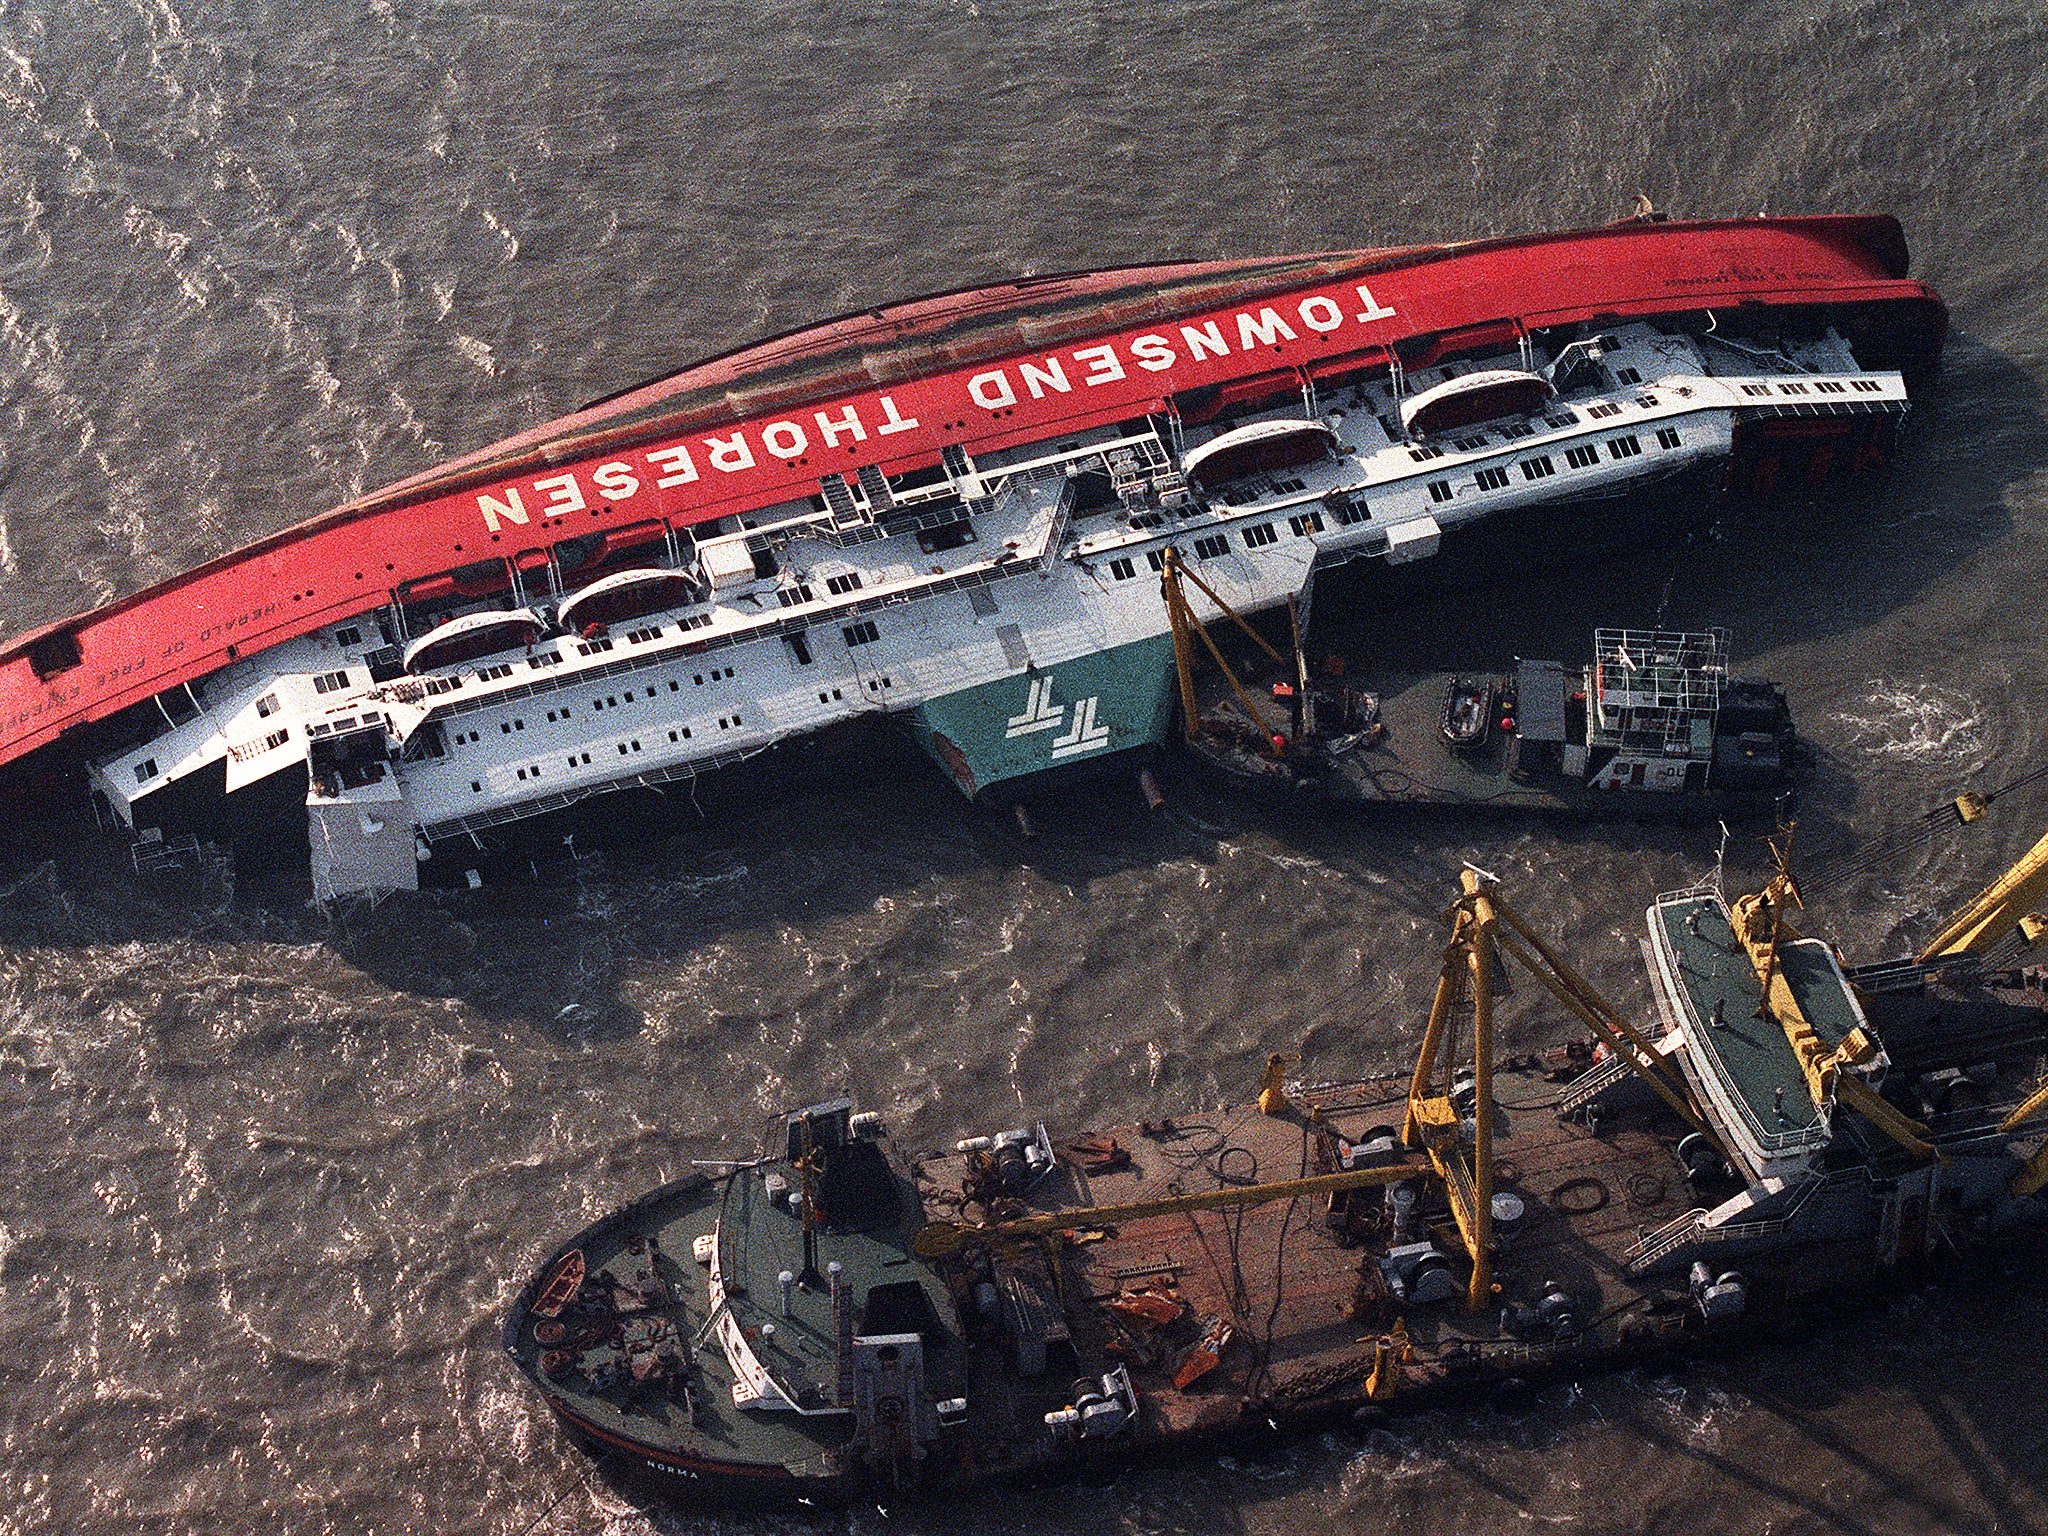 The Herald of Free Enterprise the day after the disaster, in which 193 people lost their lives, in March 1987